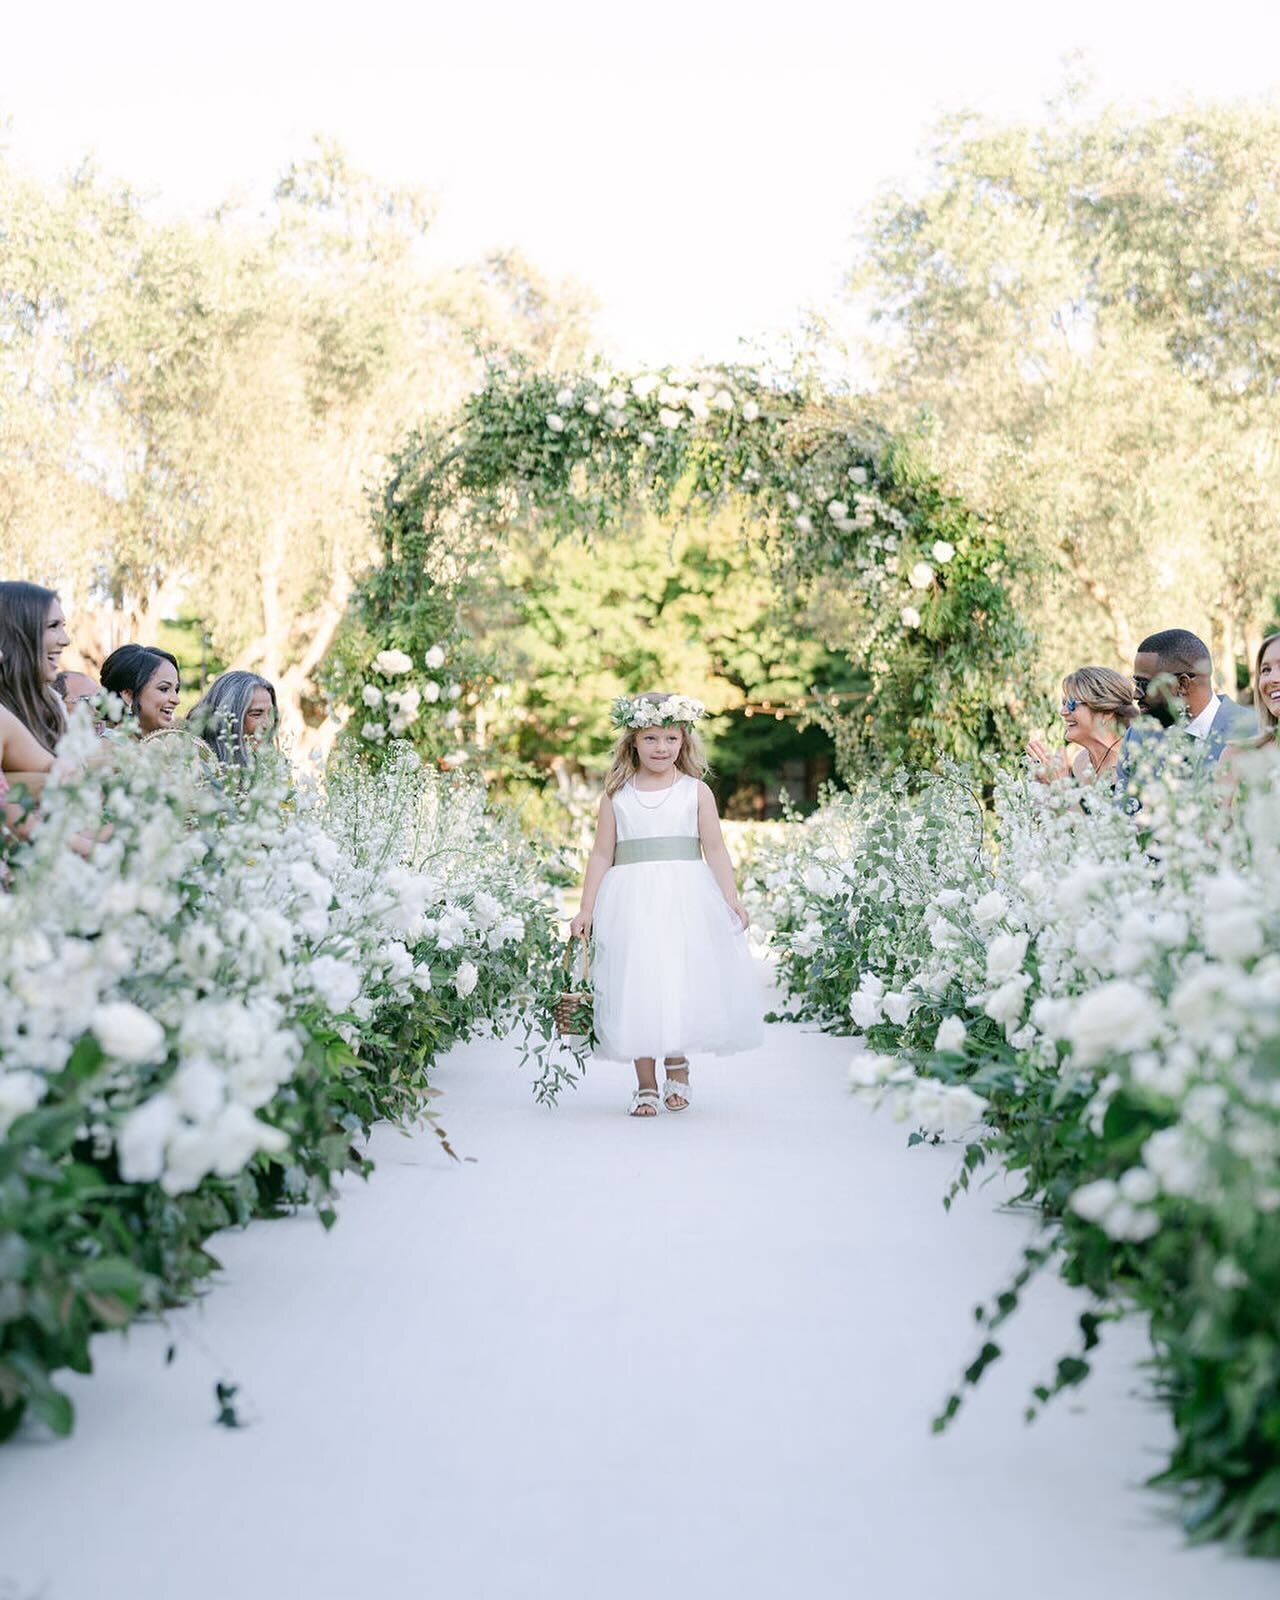 The sweetest flower girl matching perfectly with these aisle flowers